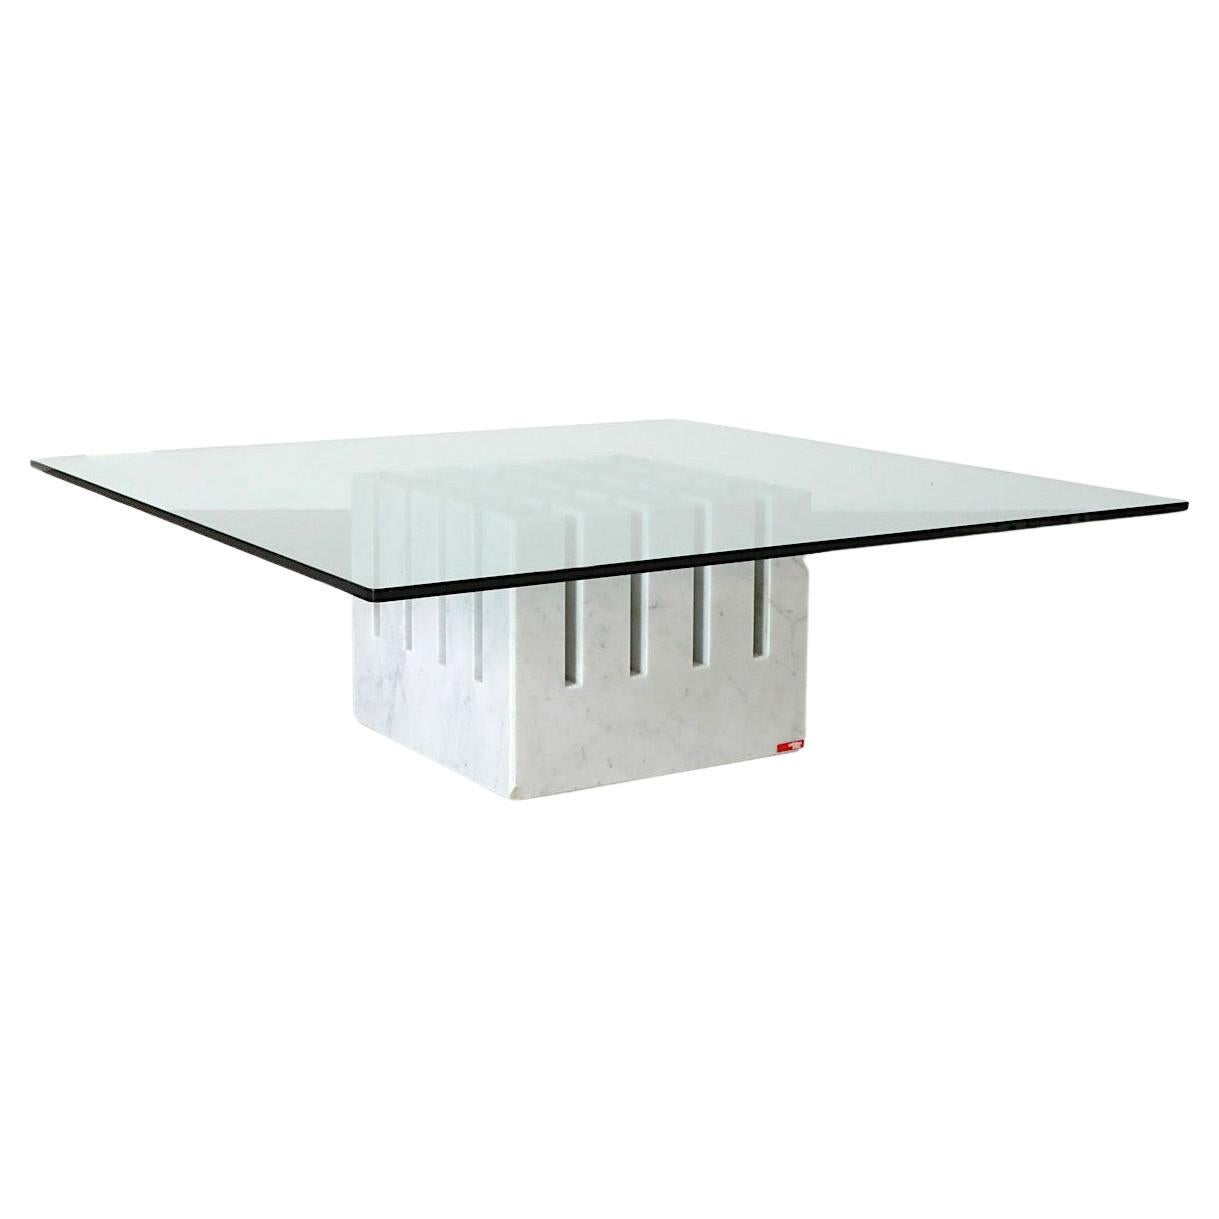 Marble ‘Scacco’ Coffee Table with Glass Top by Cattelan Italia, 1986